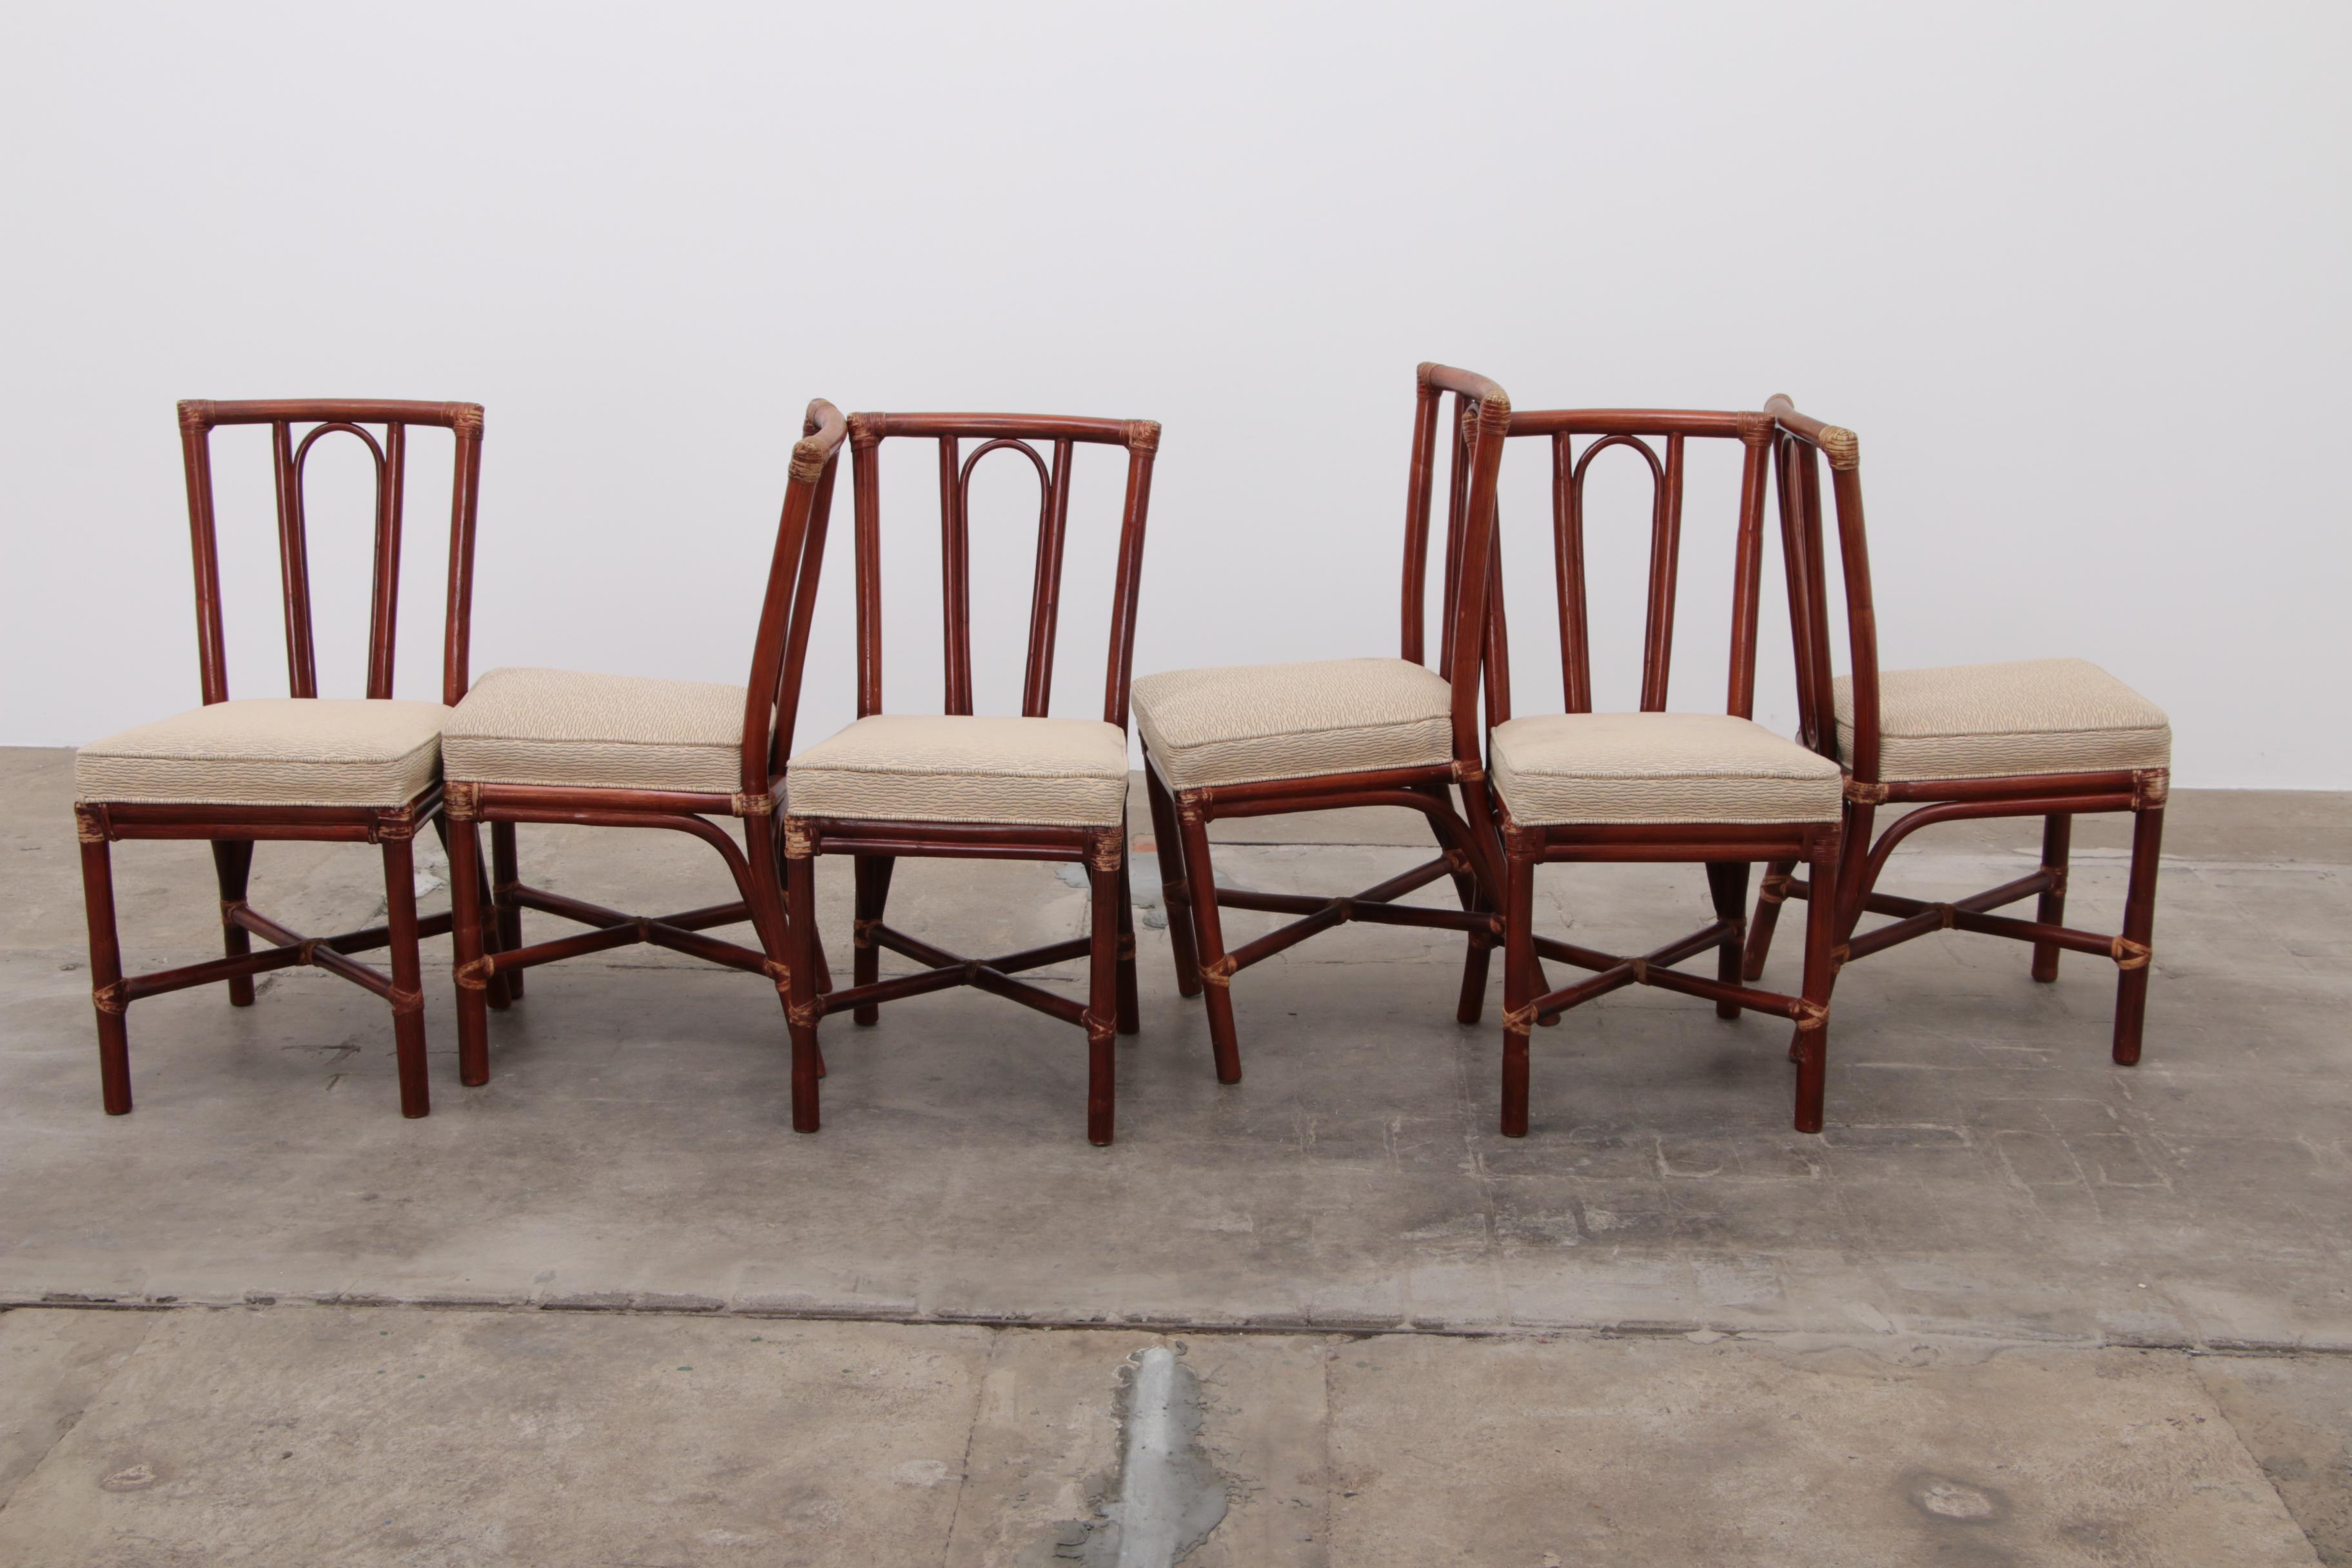 French Set of rattan dining room chairs in the organic modern Californian coastal style